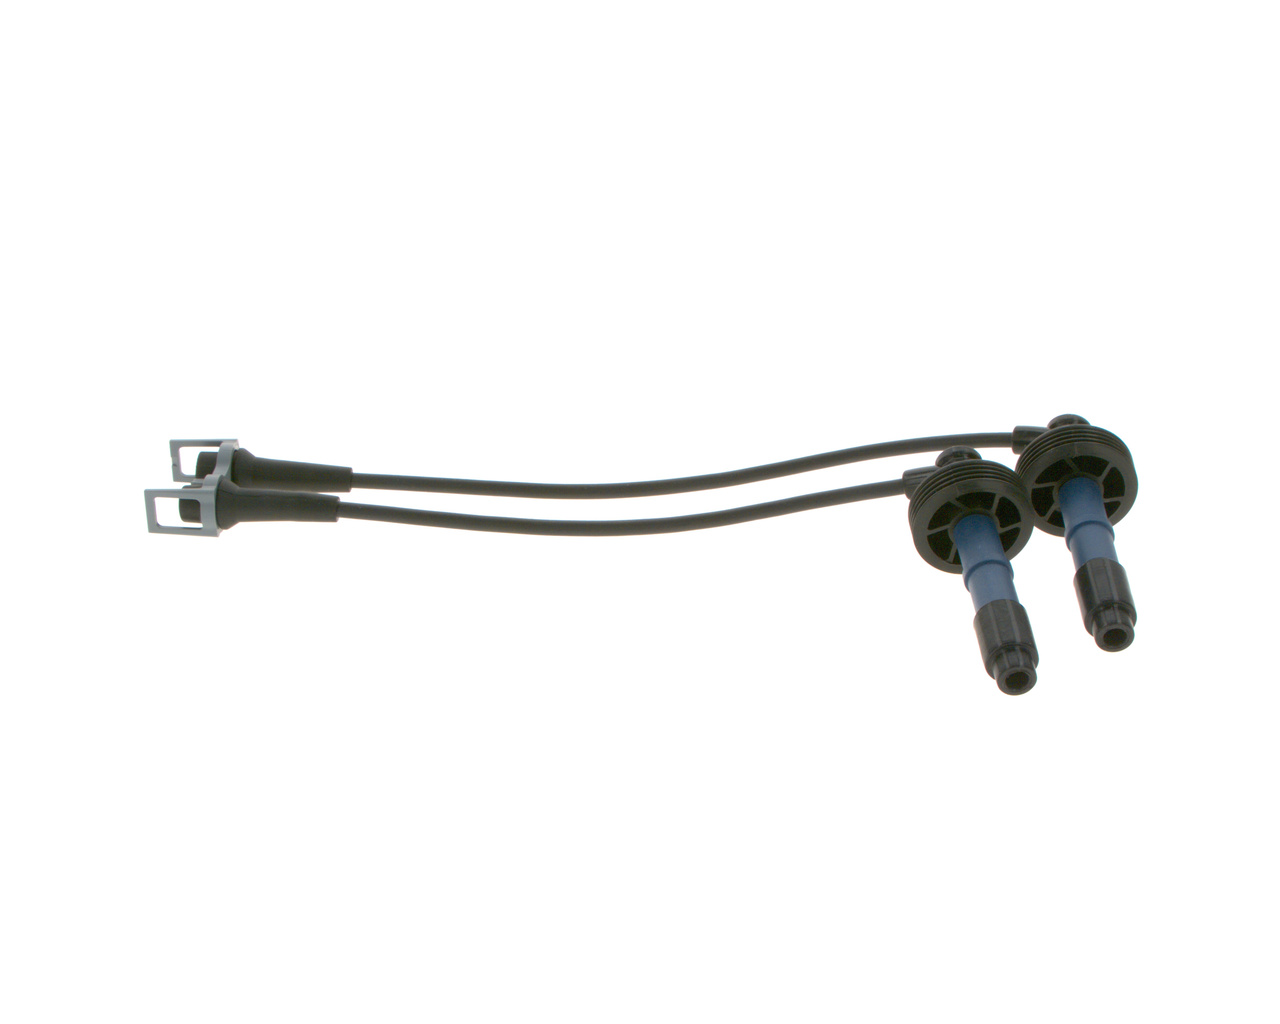 0986357238, Ignition Cable Kit, BOSCH, 1275284, 7431275284, 1275603, 600/196, BW238, ZEF1232